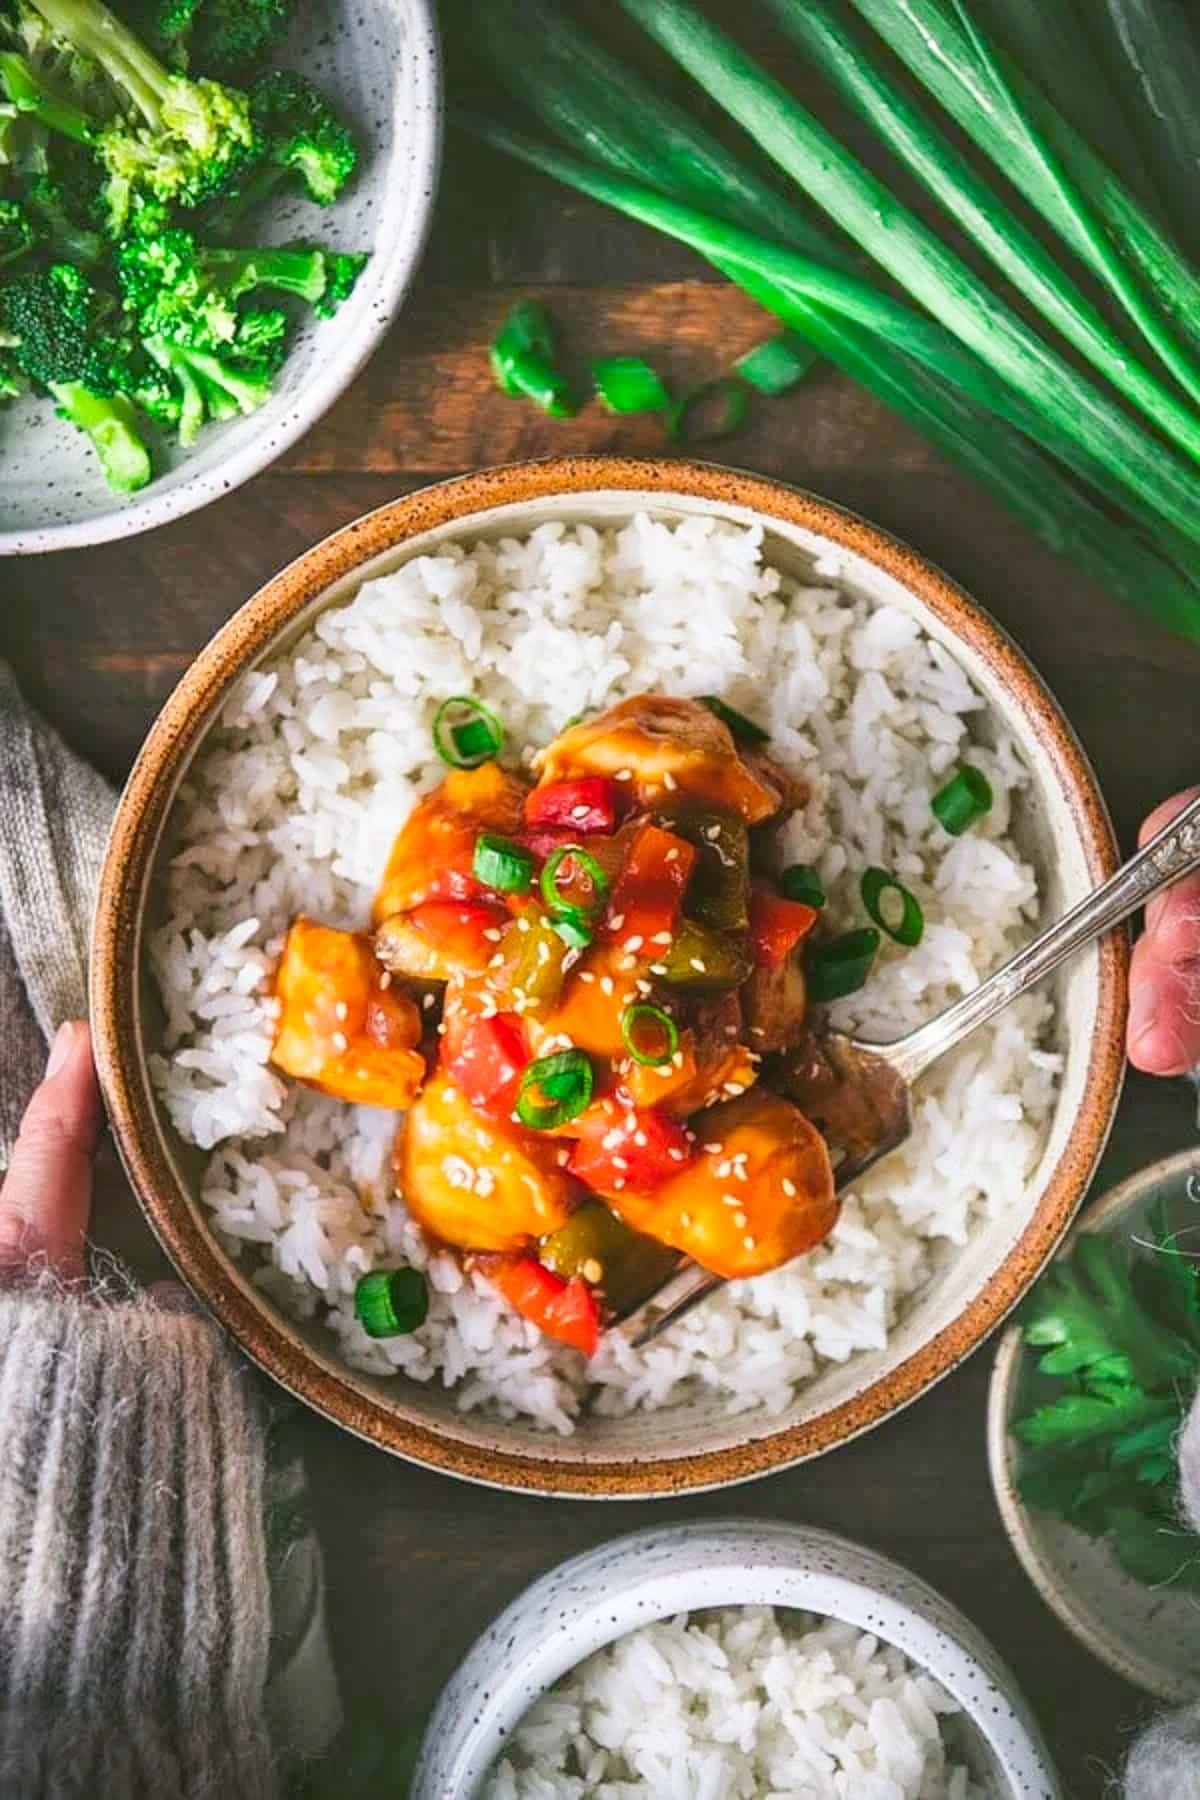 Overhead shot of hands eating a bowl of baked sweet and sour chicken with rice on a wooden table.